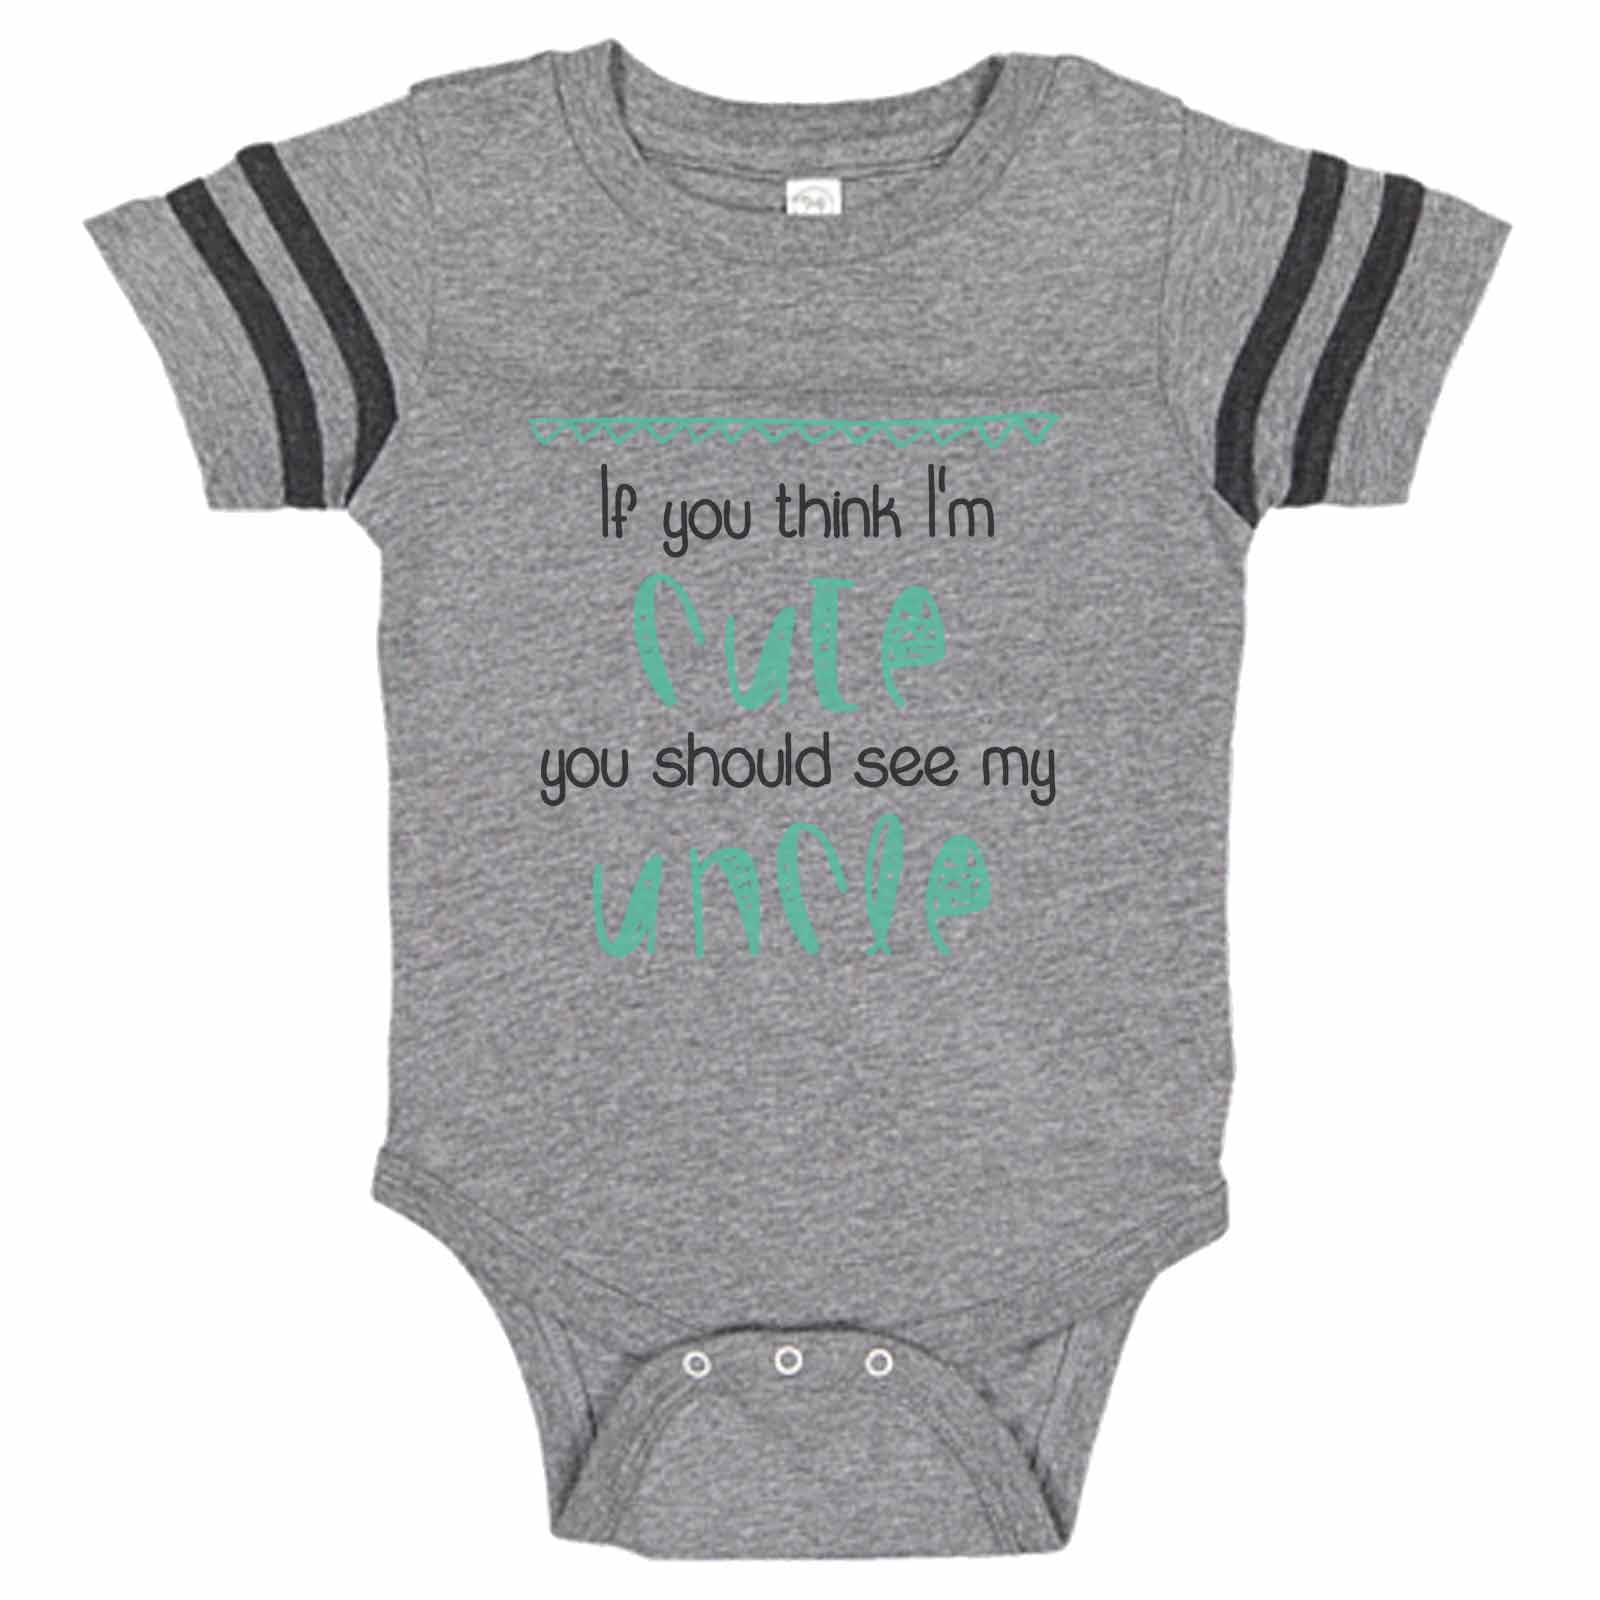 If You Think I'm Cute You Should See My Twin Boys & Girls Baby Vest Bodysuit